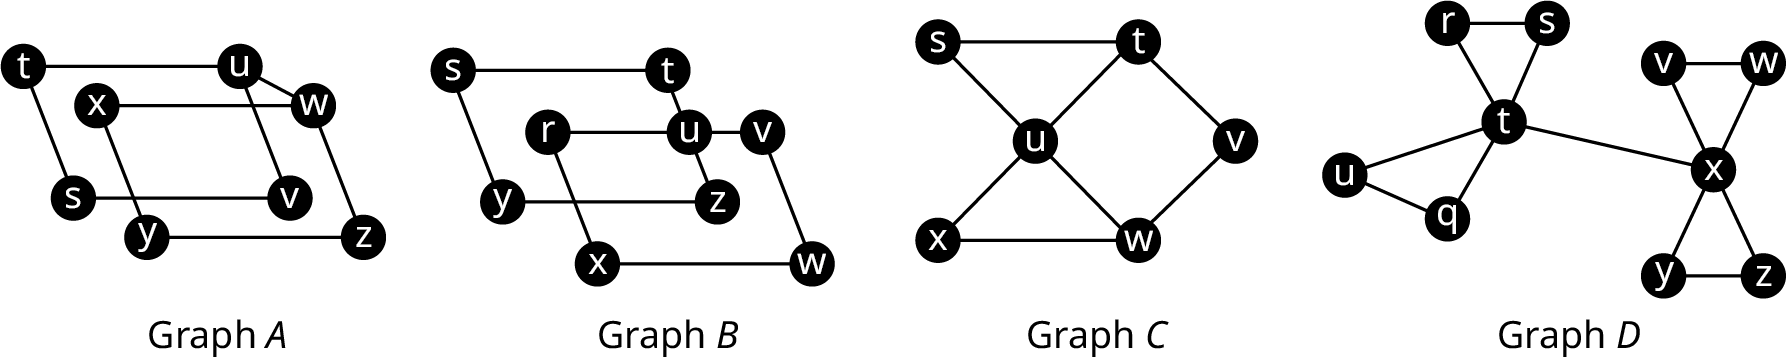 Four graphs. Graph A has two overlapping quadrilaterals, s t u v and w x y z. An edge connects w to u. Graph B has two overlapping quadrilaterals, s t z y, and r v w x. A vertex, u is at the center of r v and t z. Graph C has six vertices. The edges connect s t, t v, v w, w x, x u, w u, u s, and u t. Graph D has 10 vertices. The edges from t lead to x, r, s, u, and q. The edges from x lead to v, w, y, and z. The edges connect r s, u q, v w, and y z.